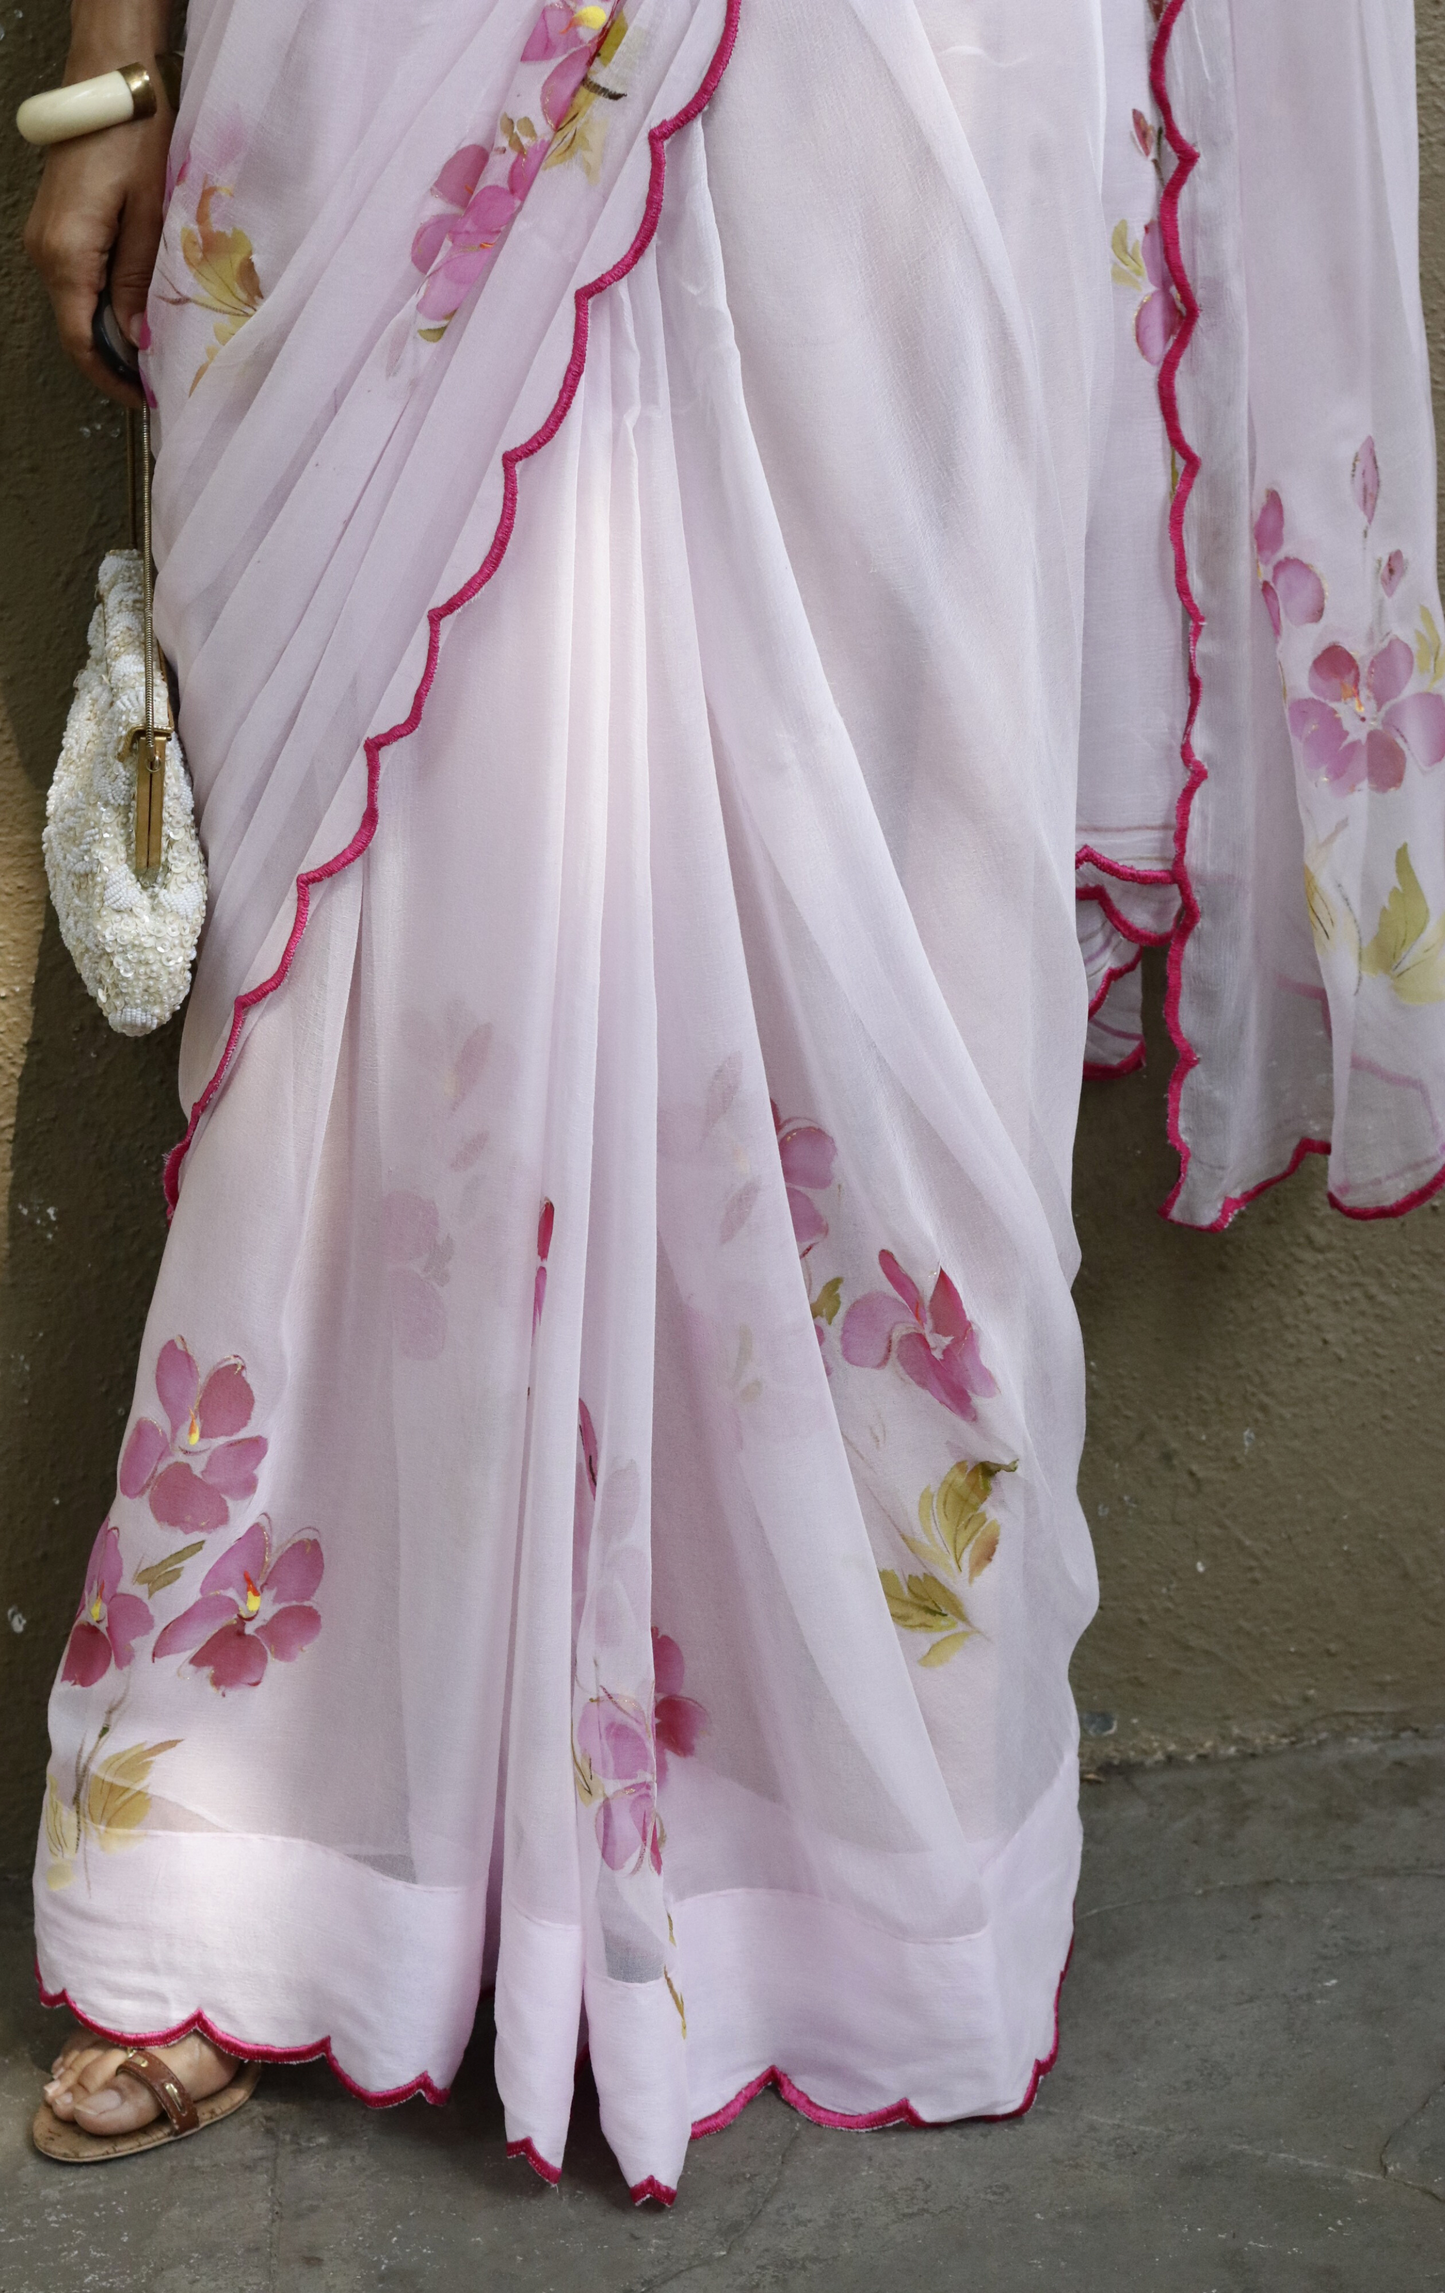 Buy Floral Pure Chiffon Hand Painted Saree Online : 'Cherry Blossom' Floral Pure Chiffon Saree With Scalloped Edges